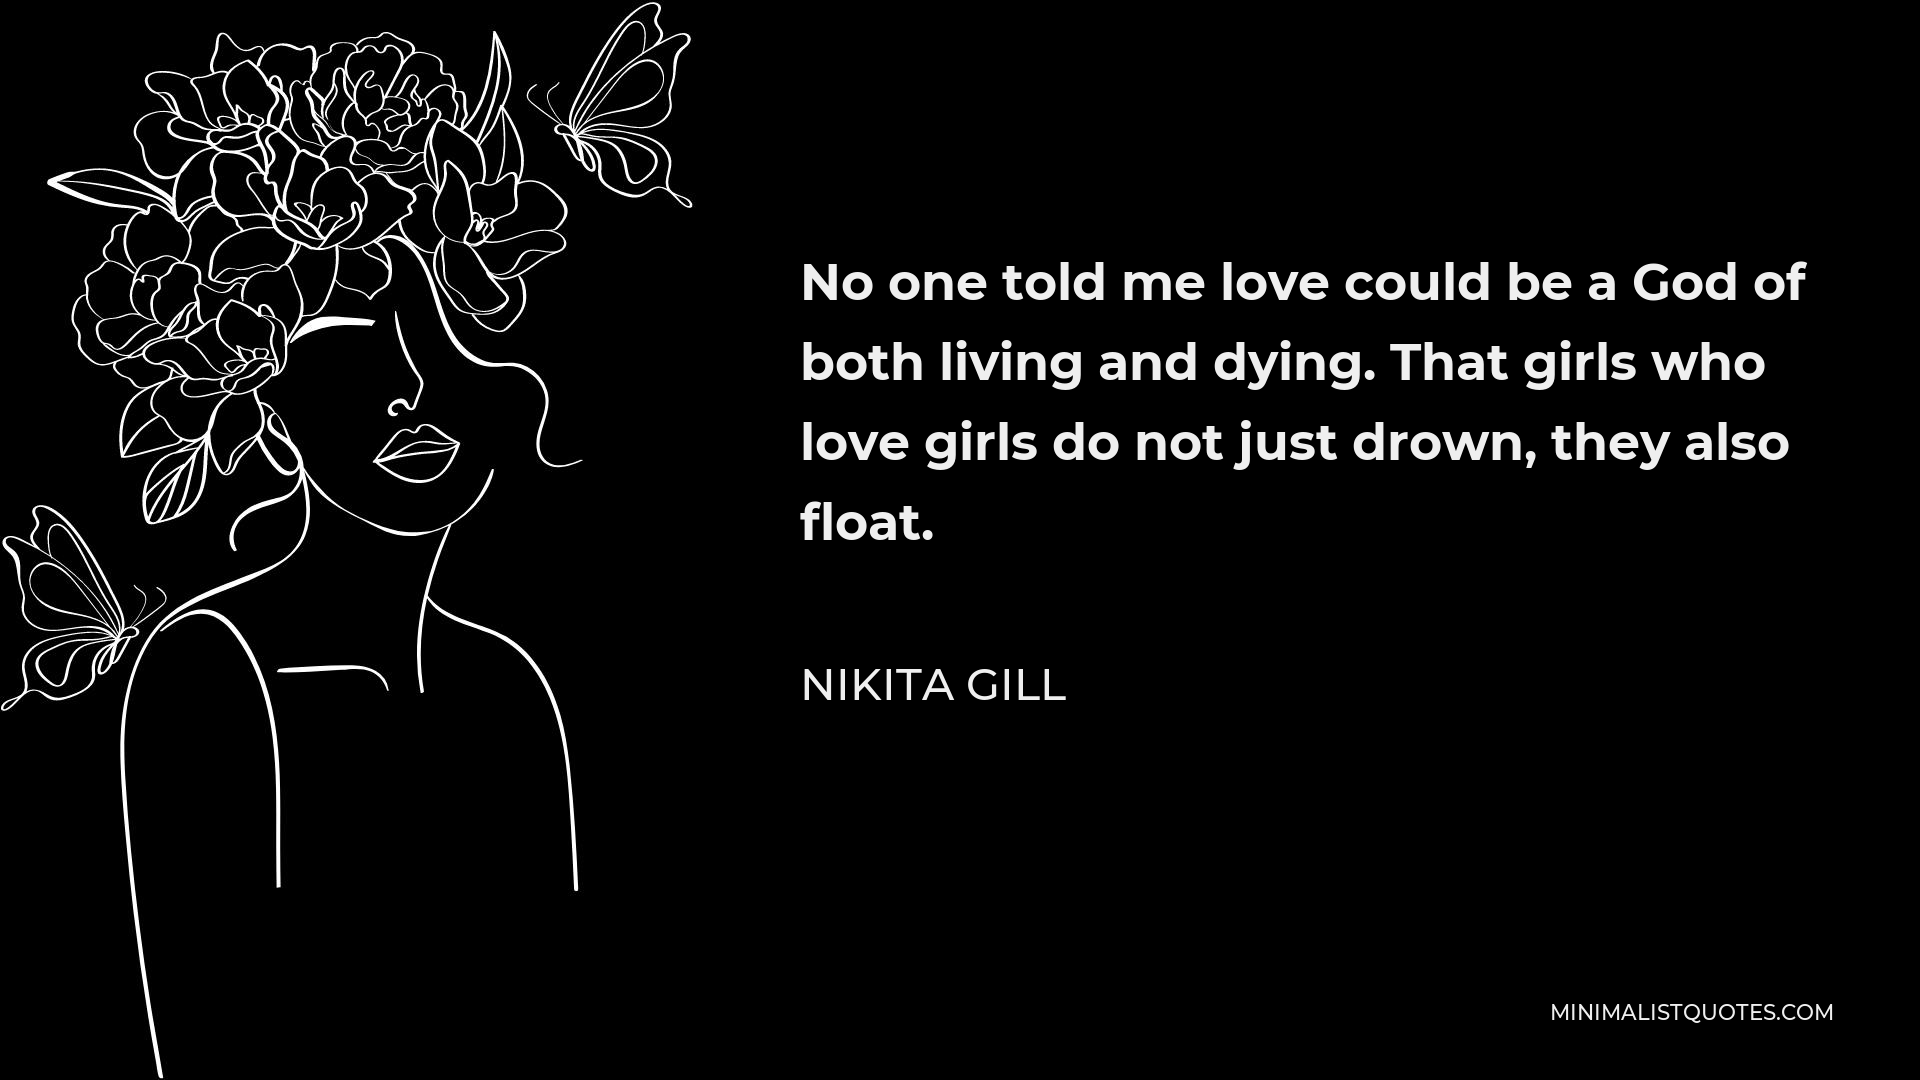 Nikita Gill Quote - No one told me love could be a God of both living and dying. That girls who love girls do not just drown, they also float.